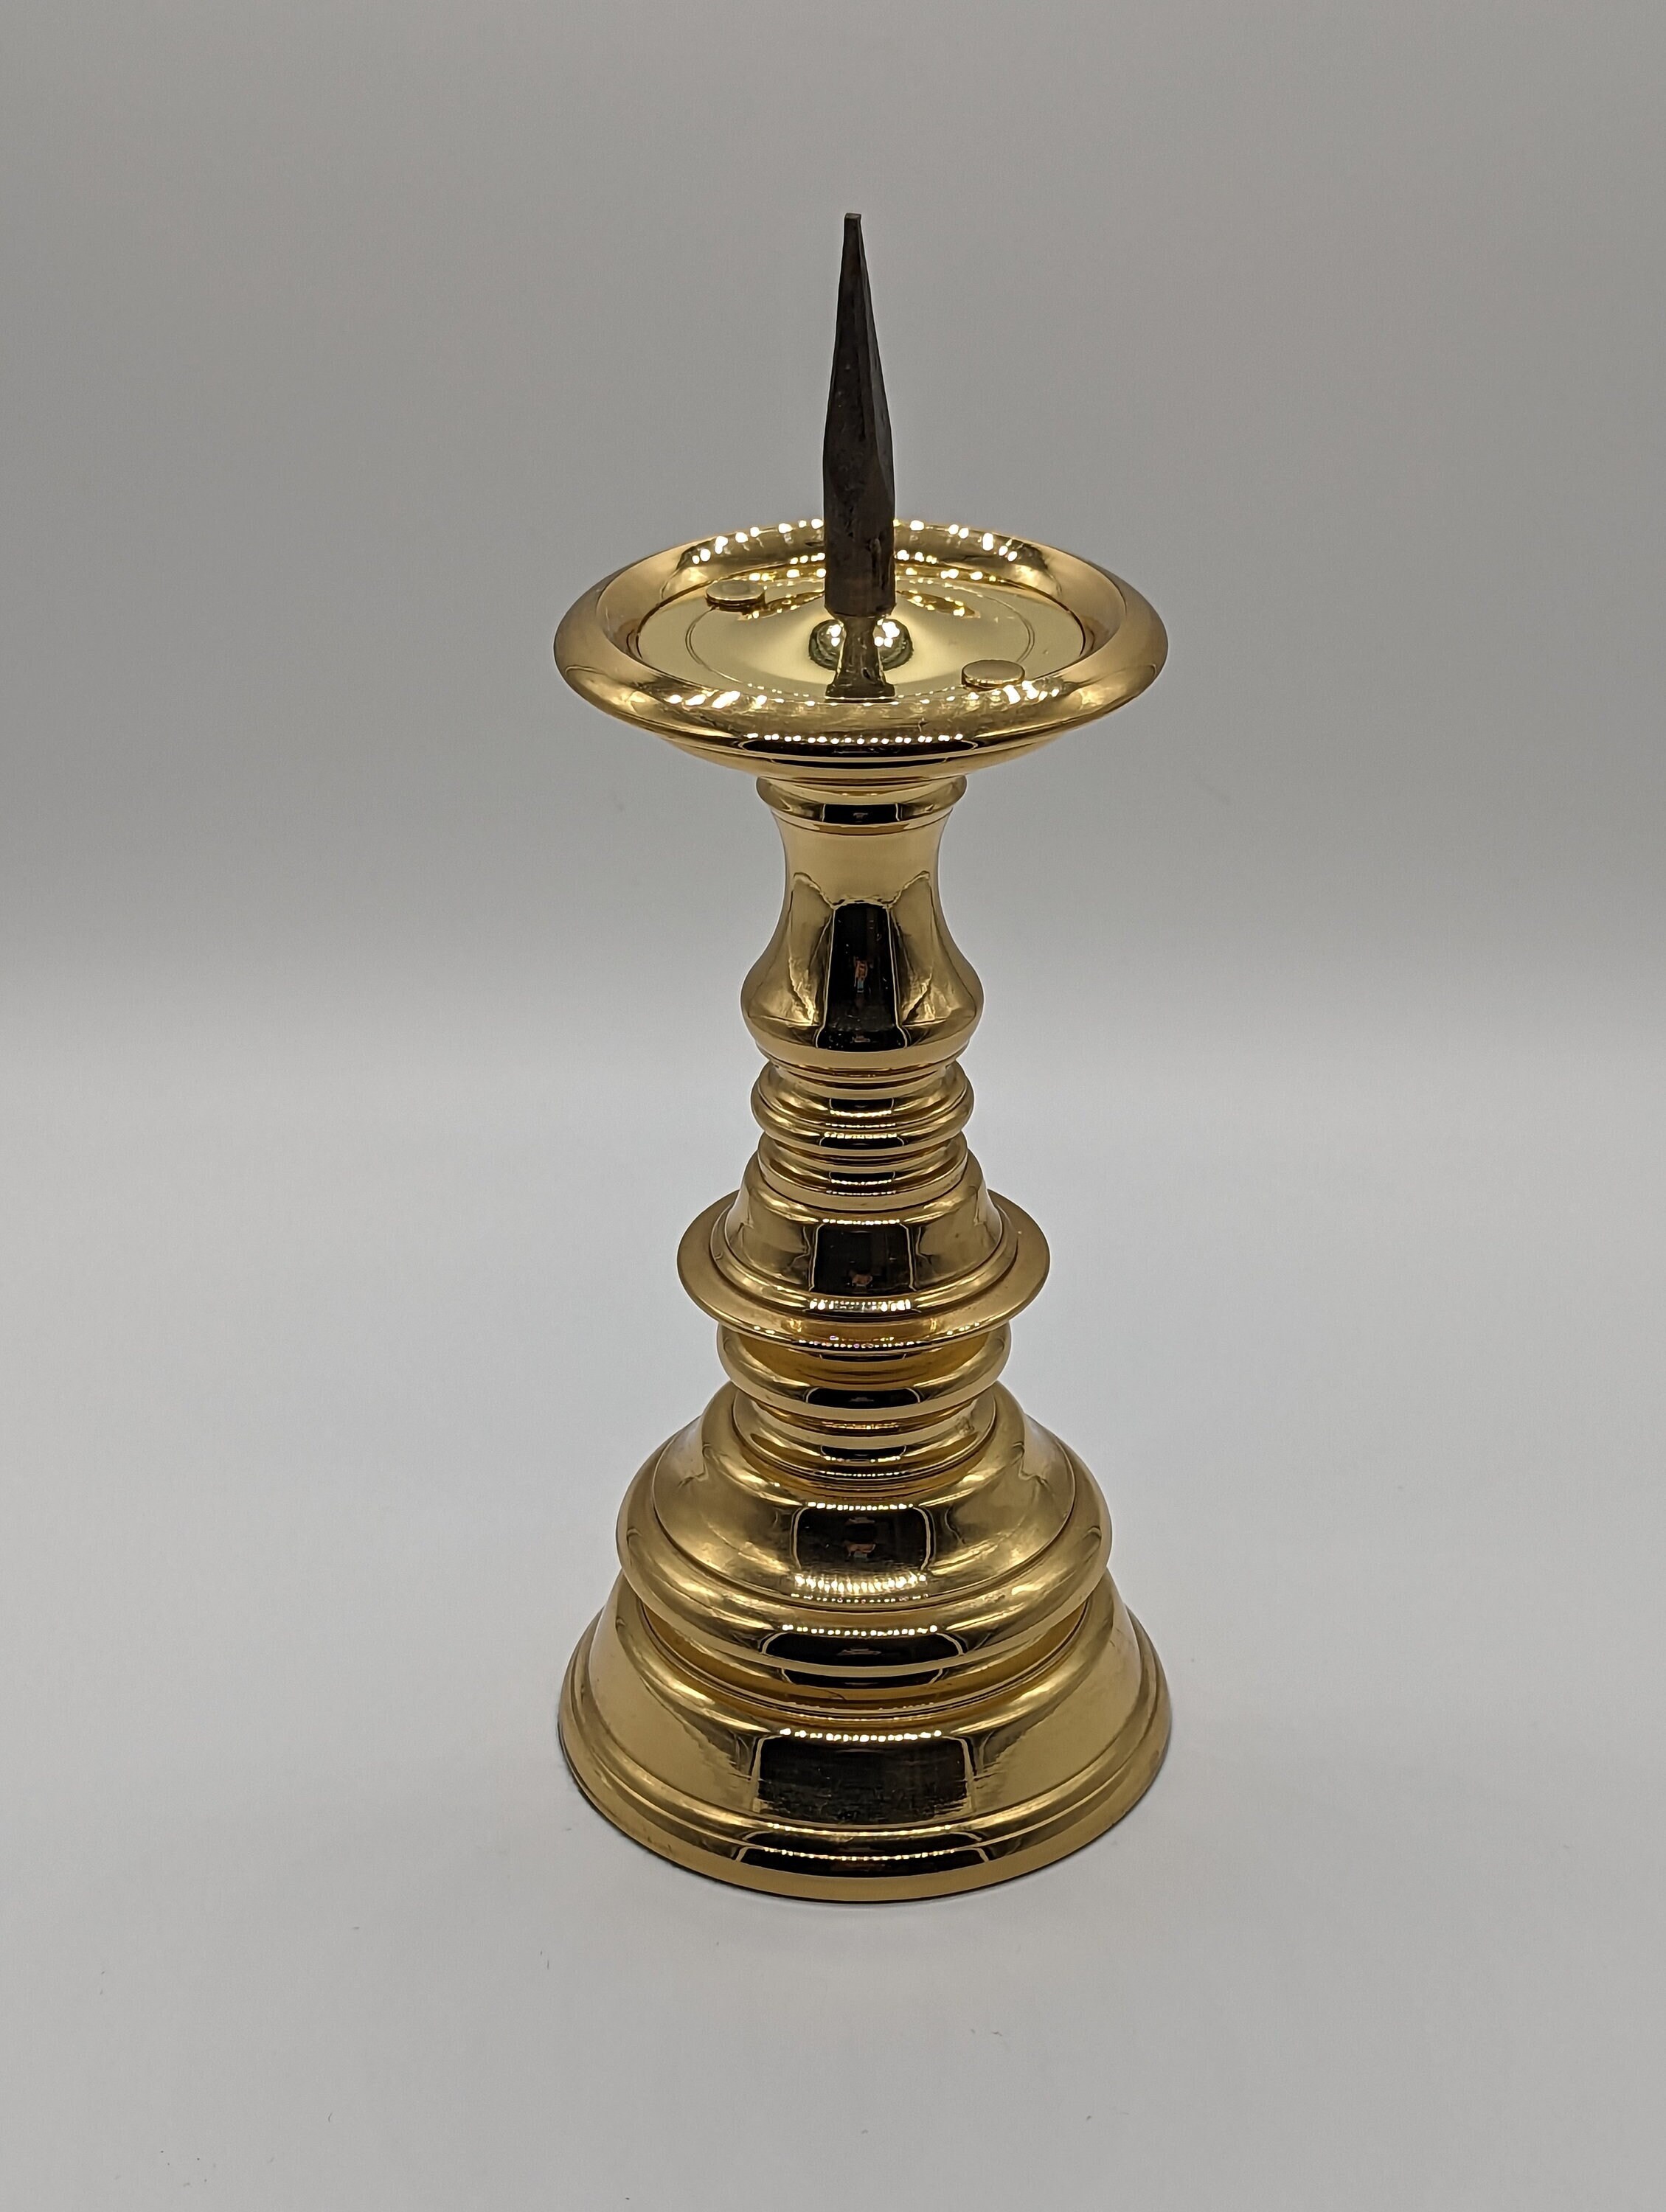 Buy Pricket Candlestick Online In India -  India